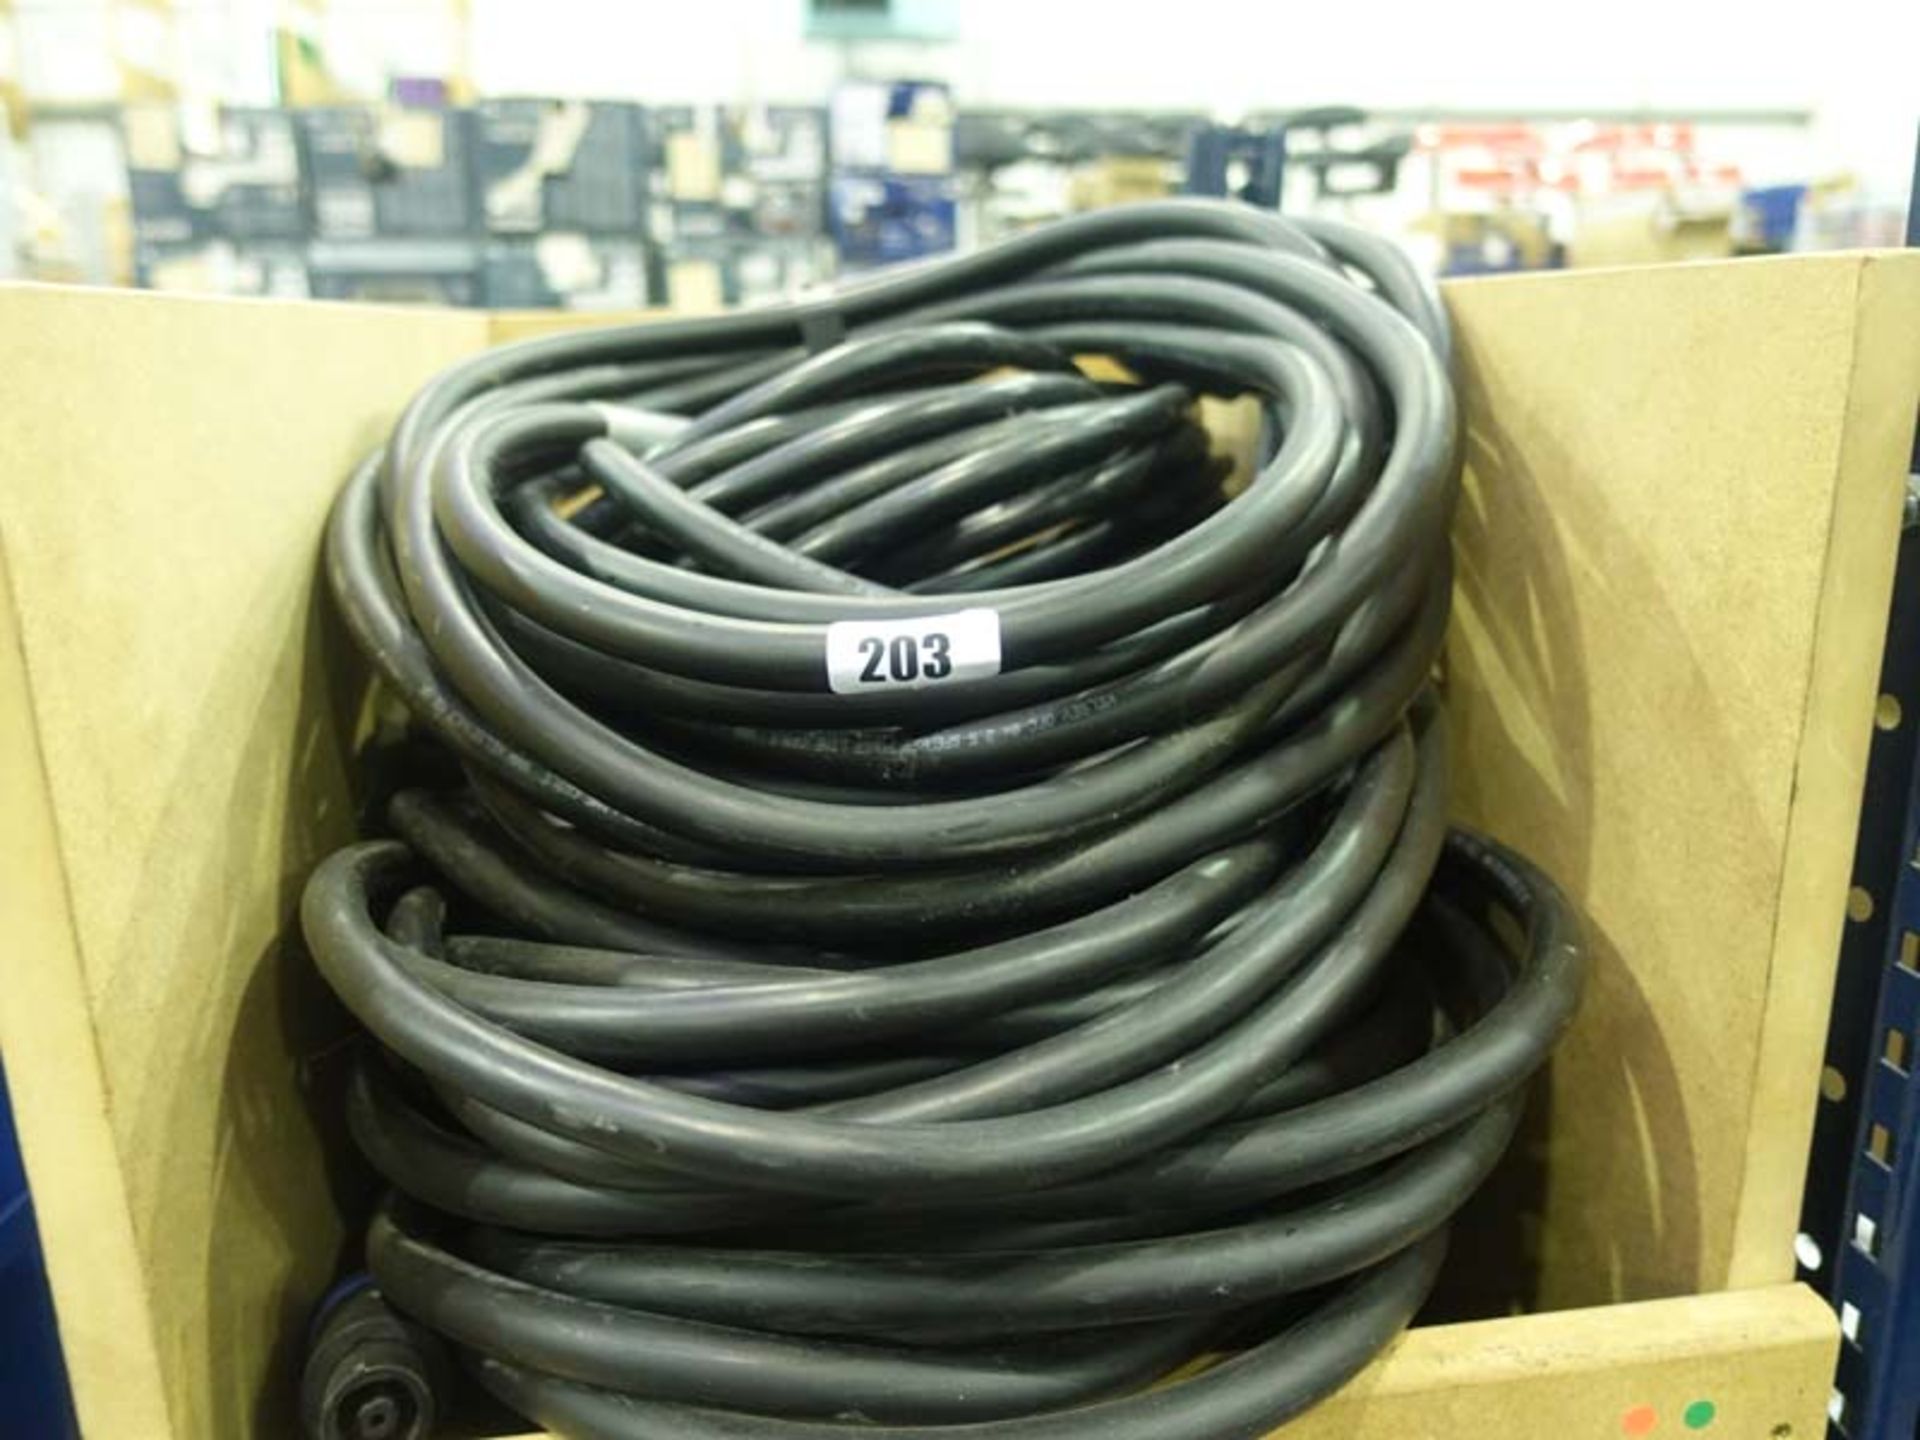 NL8 Speaker cables and power cables